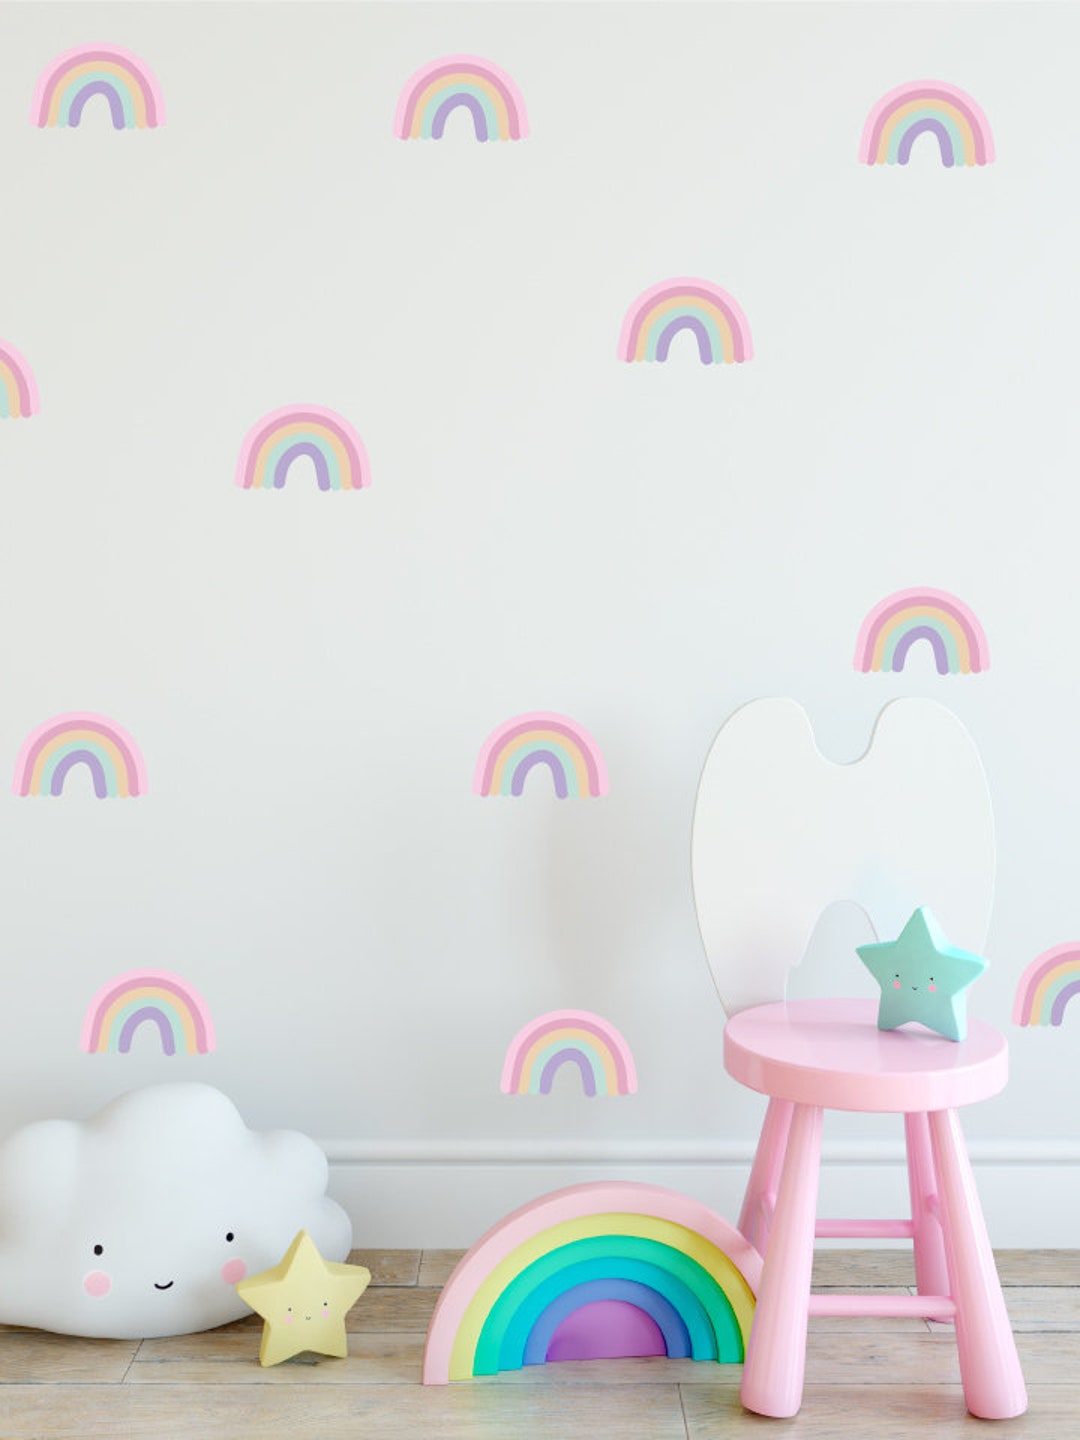 24 Pastel Color Rainbows Wall Stickers Decals Decor for Etsy Canada